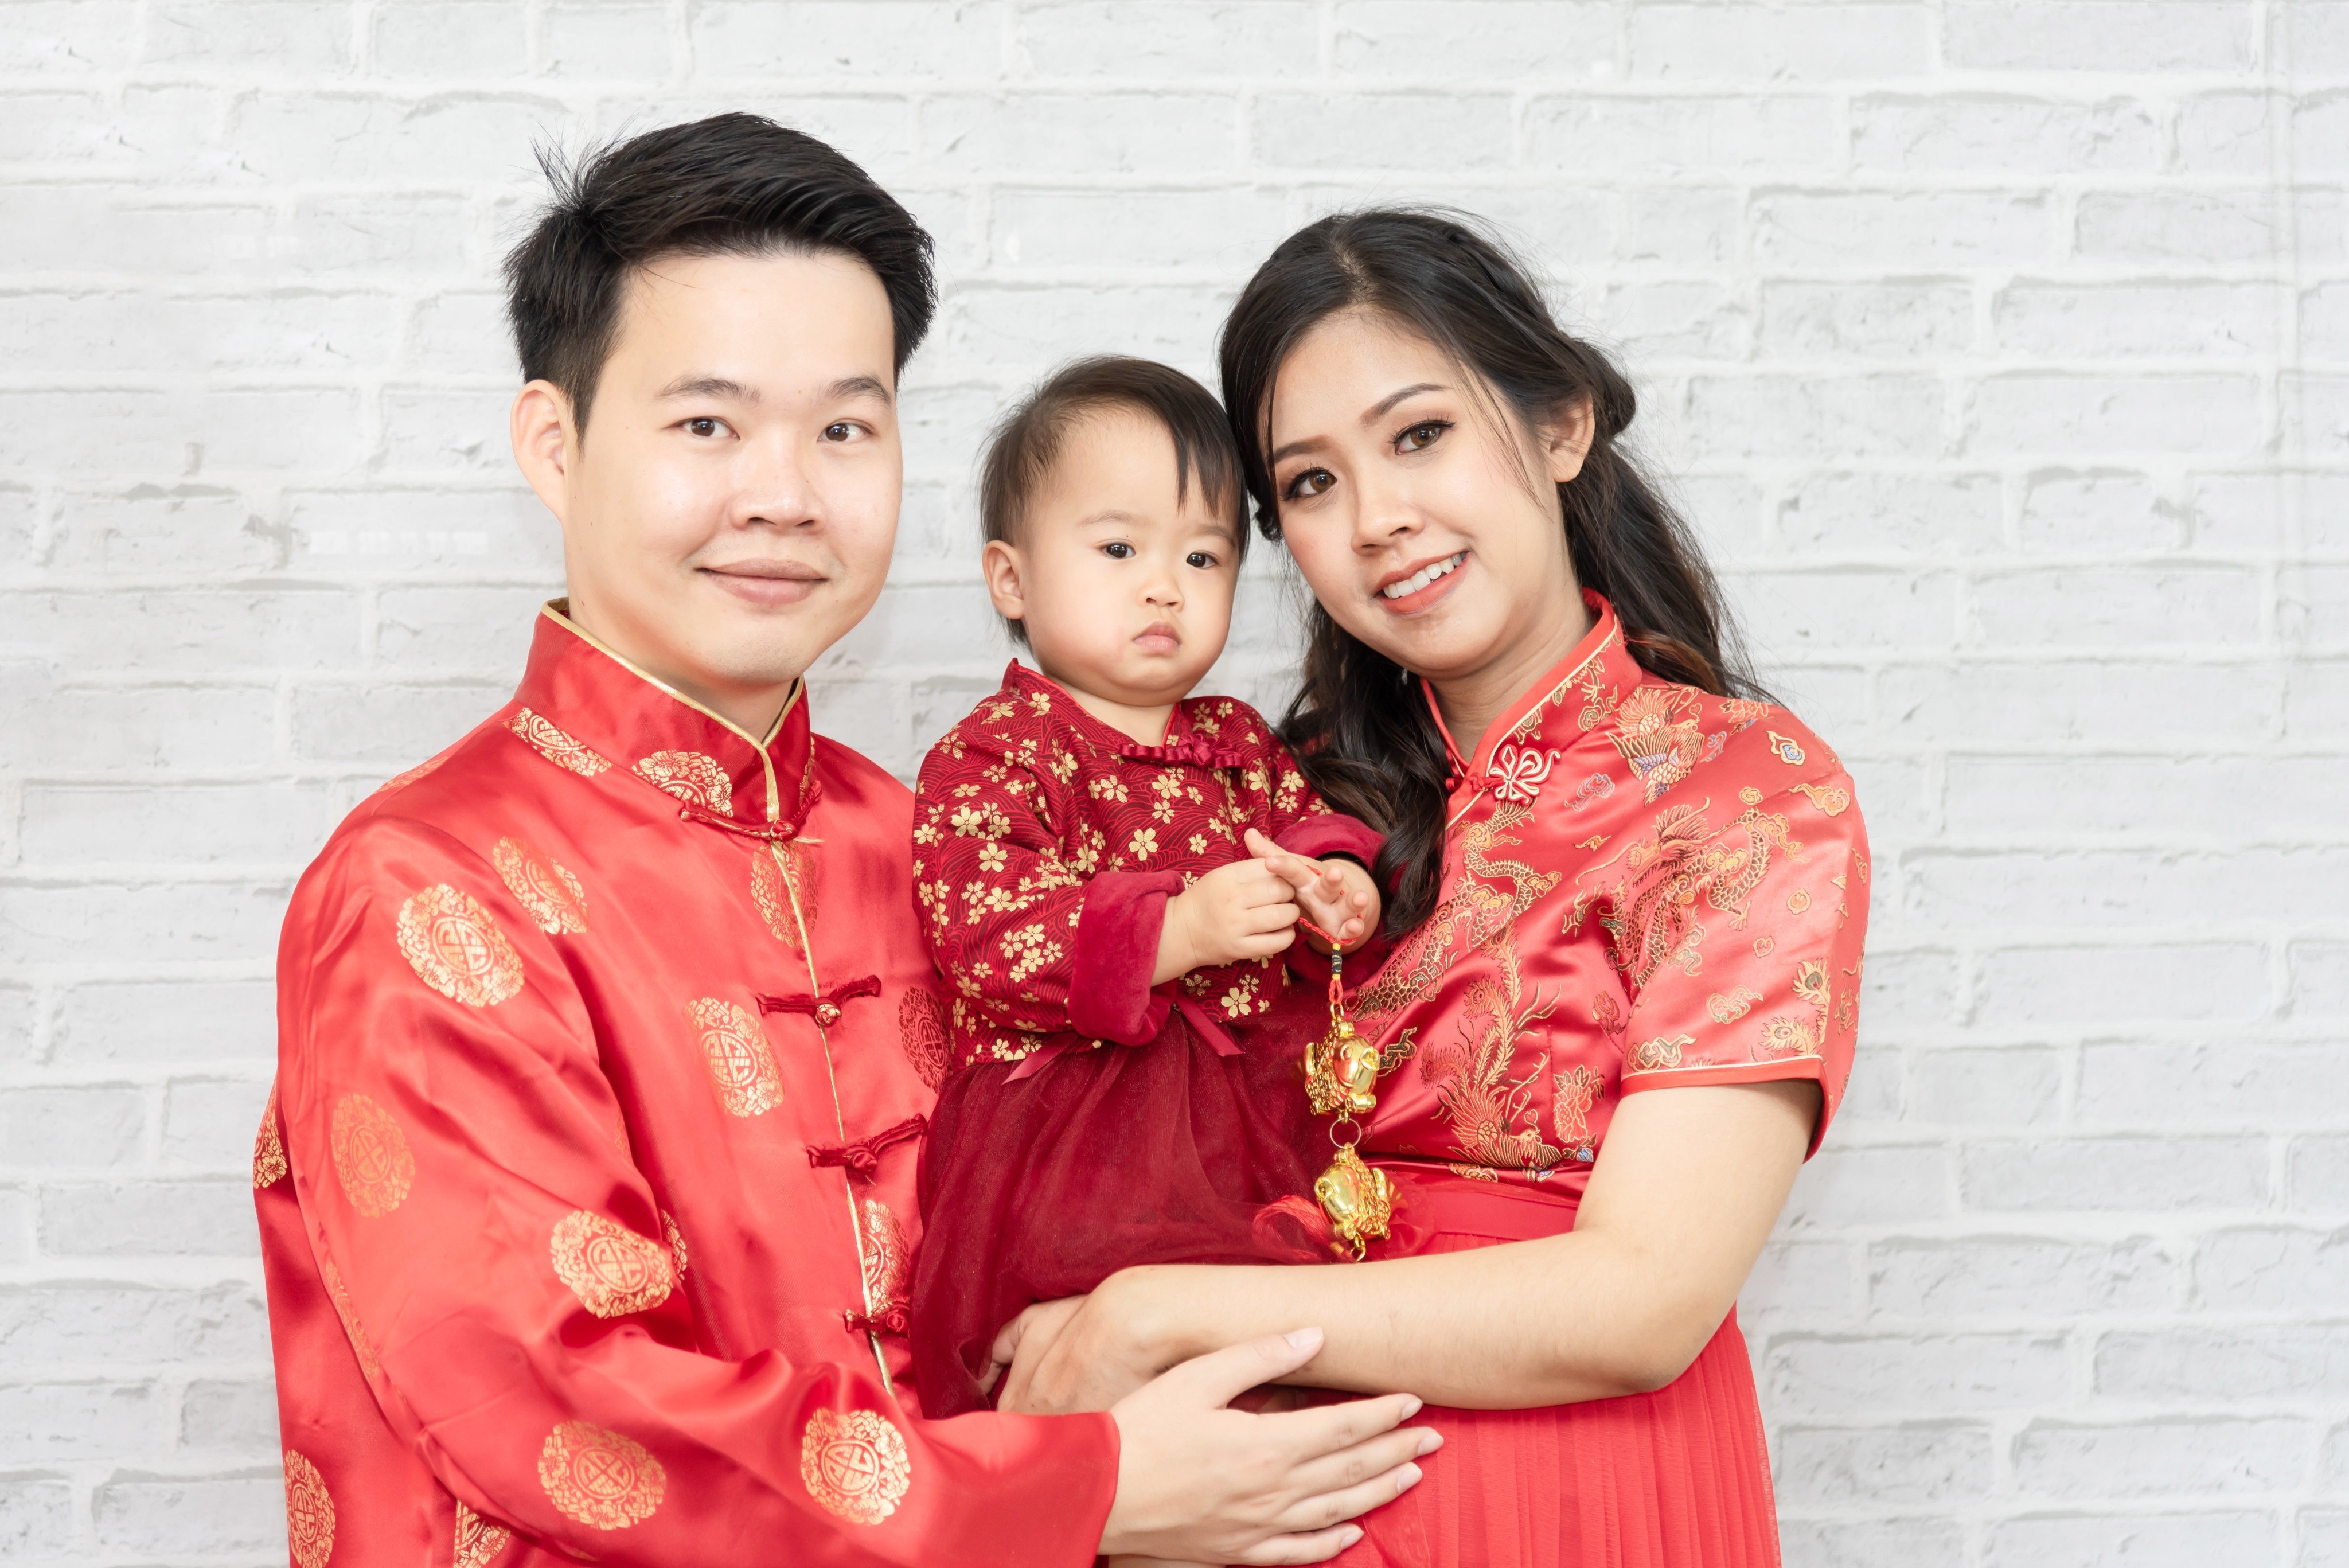 To ensure good luck in the year to come, wear red clothing that’s new at Chinese New Year, like this family. Photo: Shutterstock Images